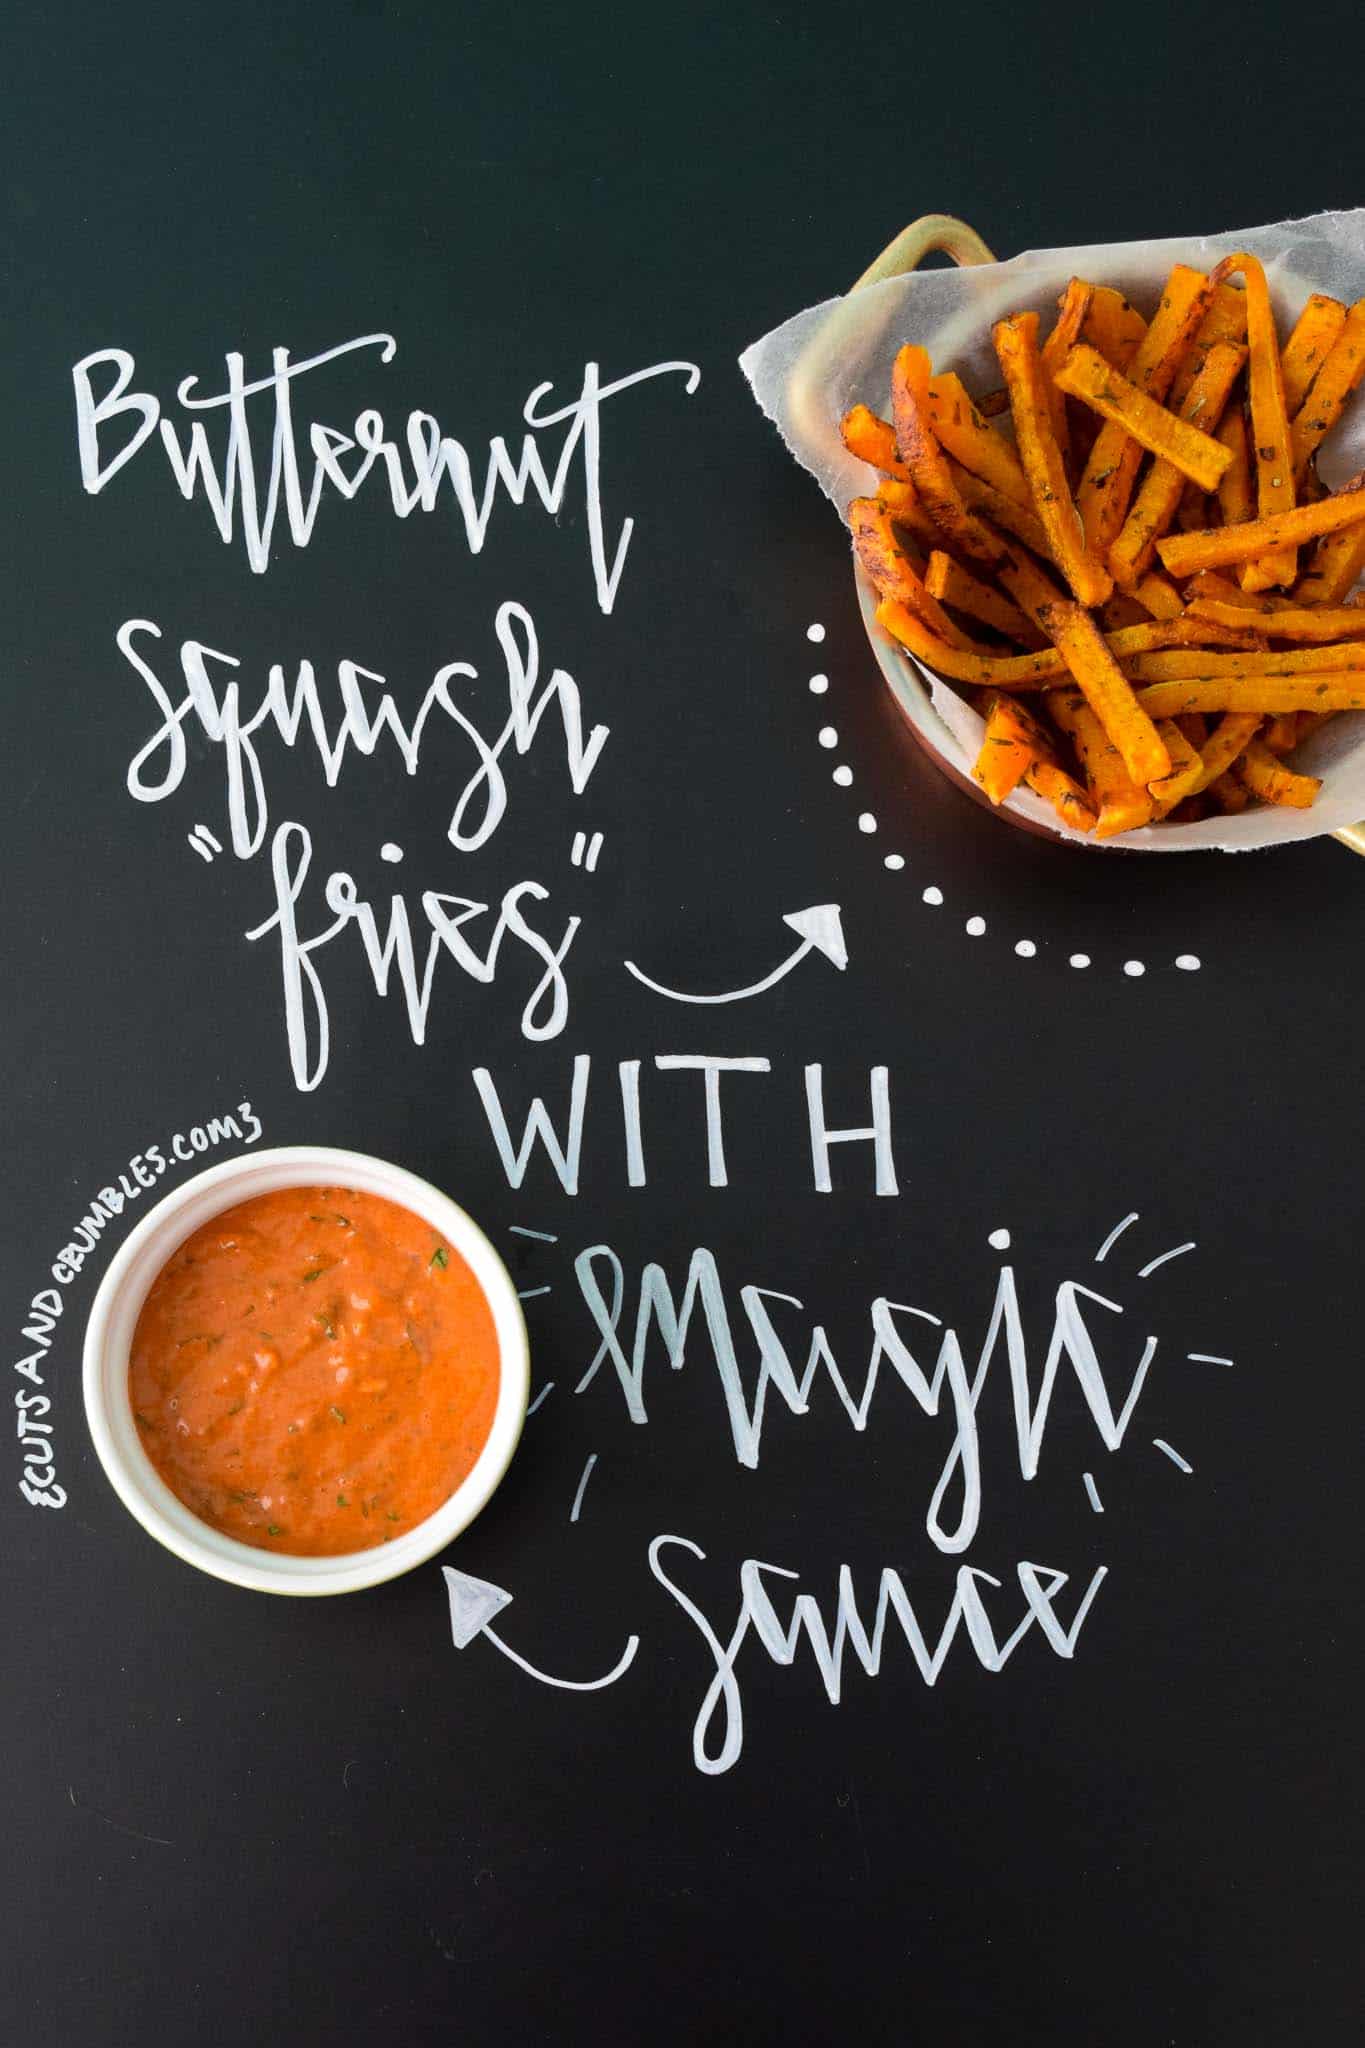 Butternut Squash Fries with Magic Sauce with title written on chalkboard